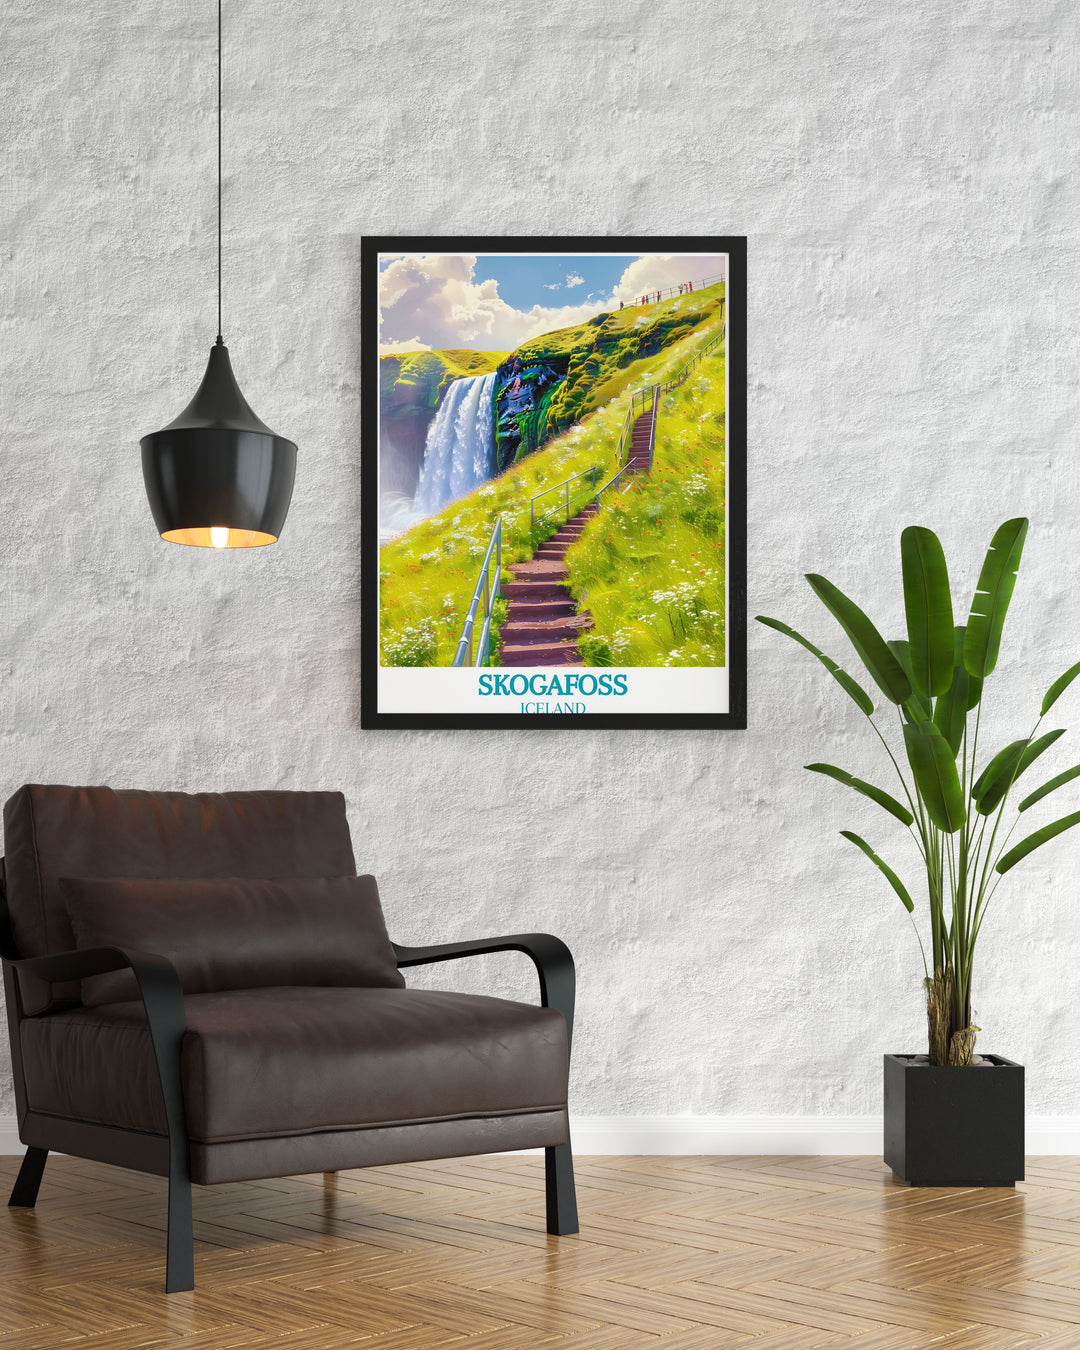 Delight in the natural wonder of Skogafoss with this art print, capturing the powerful flow of the waterfall and the thrill of hiking its steep staircase.